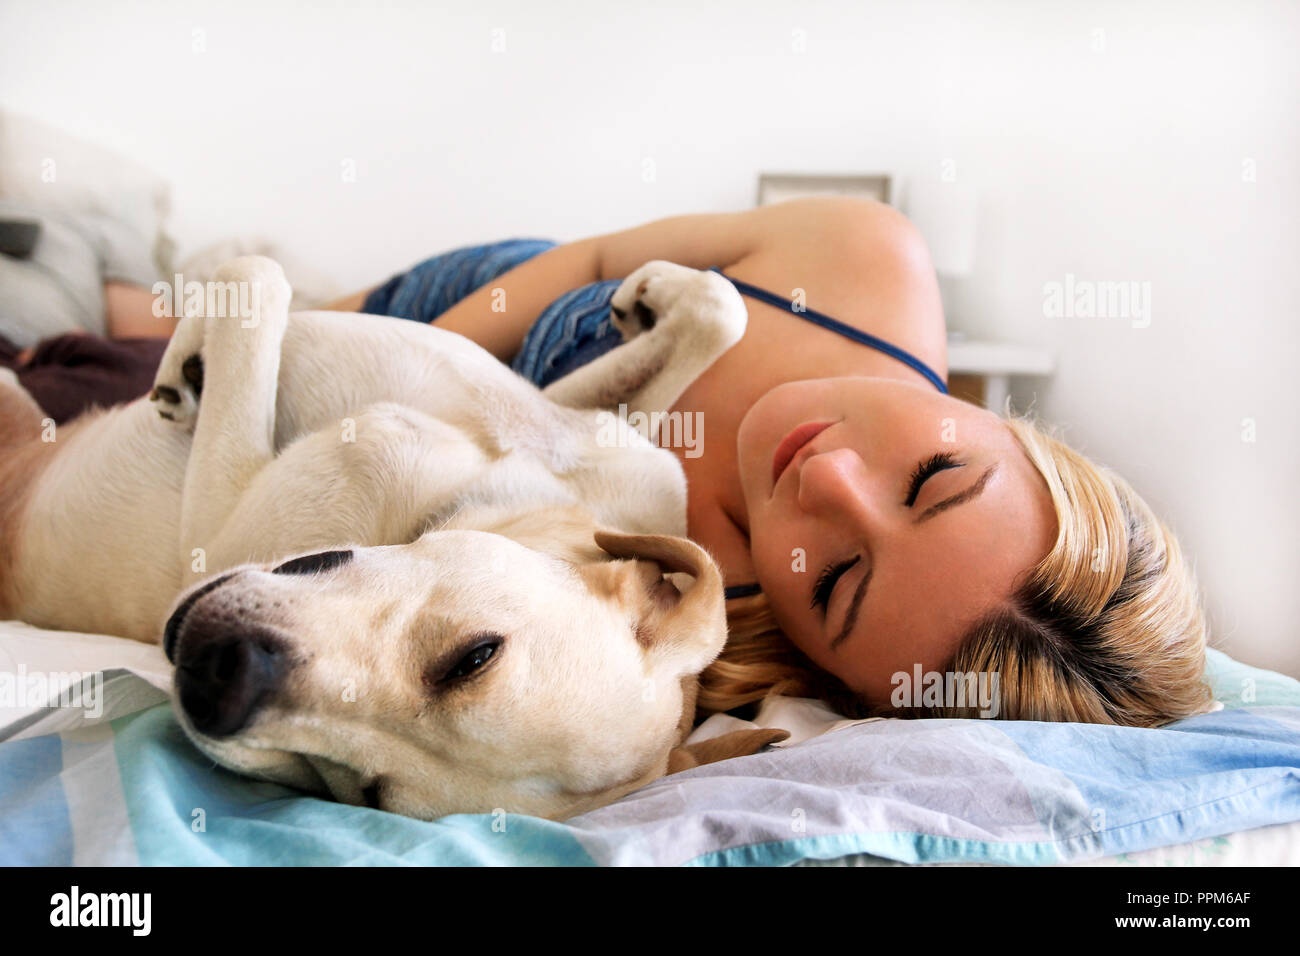 Woman With Dogs At Home Handsome Woman Resting And Sleeping